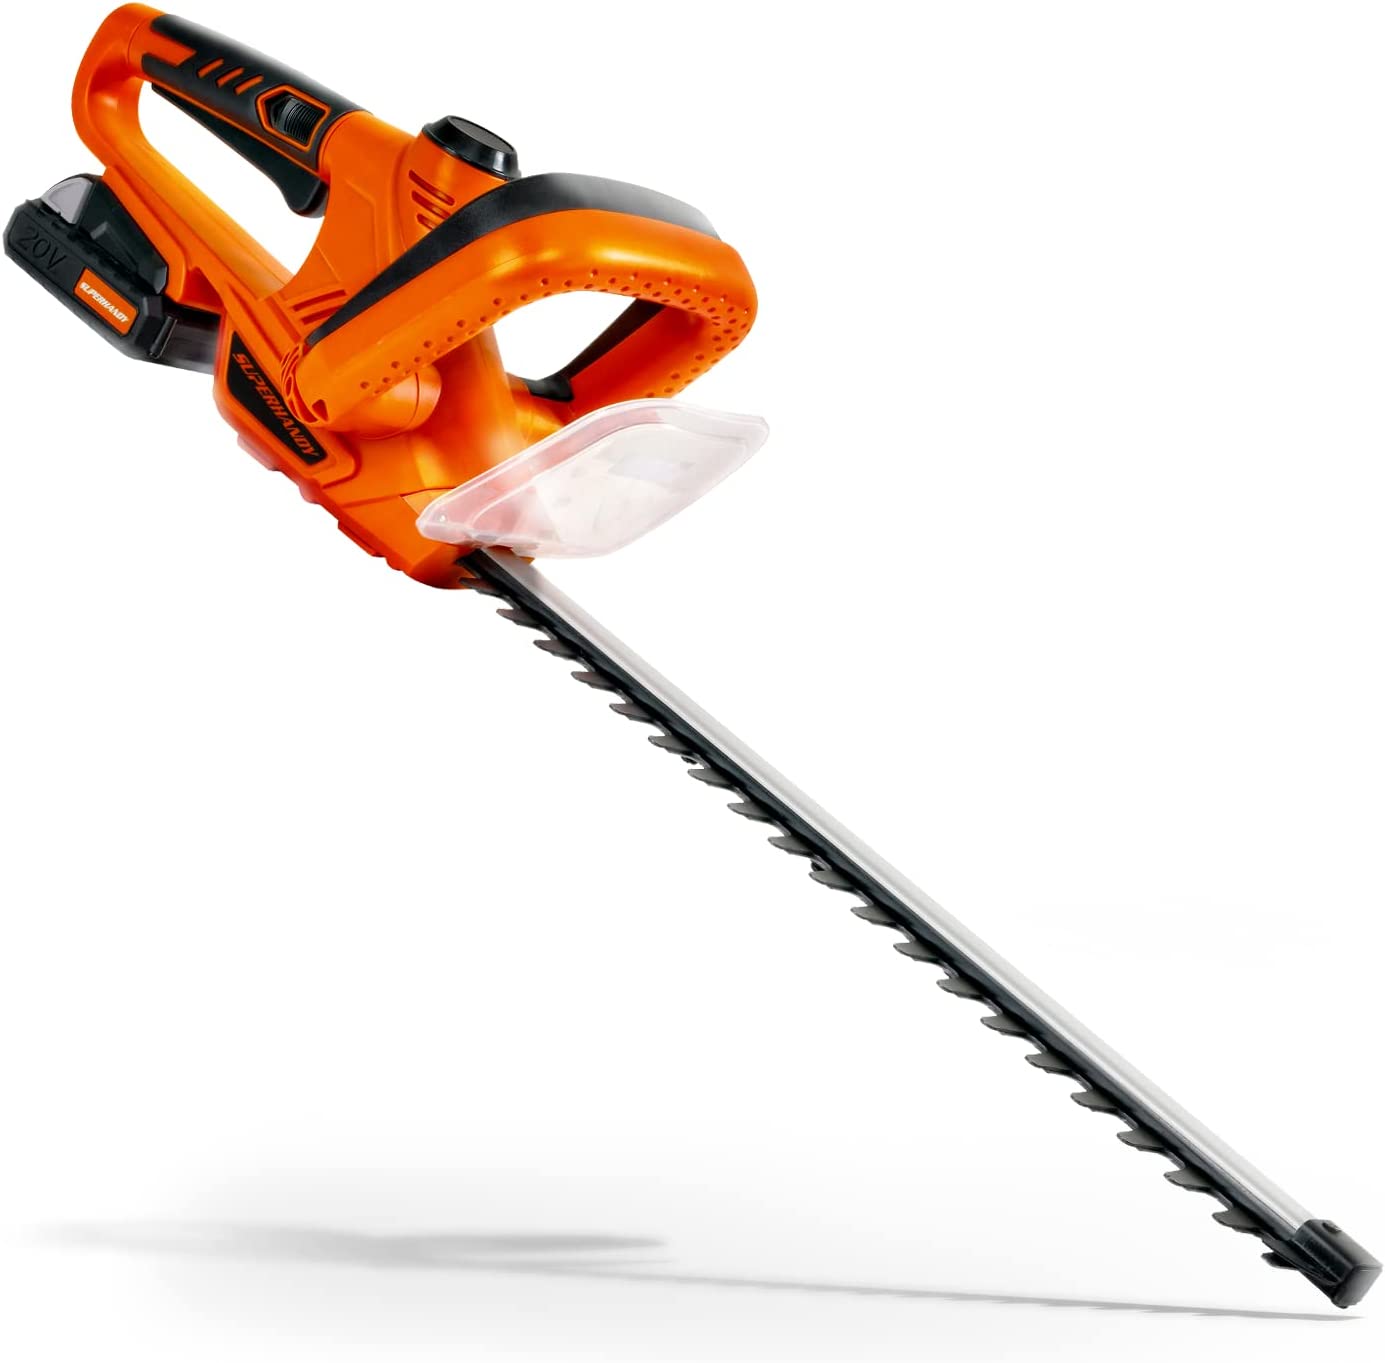 Electric Hedge Trimmer, 17 In.